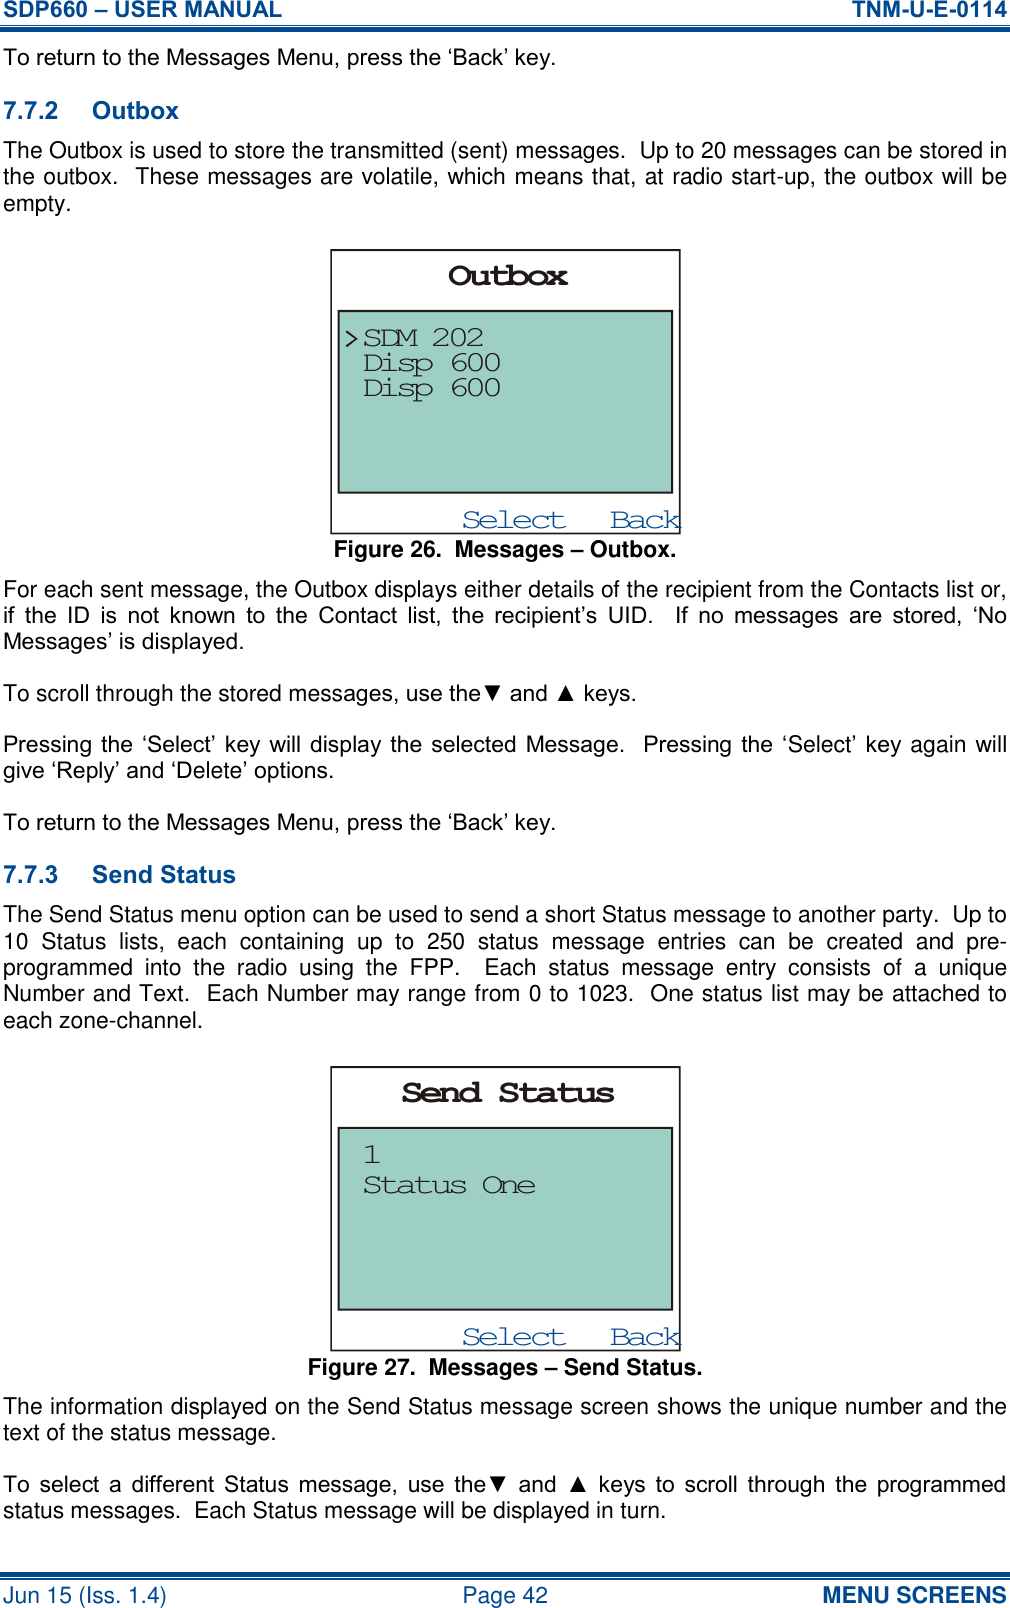 SDP660 – USER MANUAL  TNM-U-E-0114 Jun 15 (Iss. 1.4)  Page 42 MENU SCREENS To return to the Messages Menu, press the ‘Back’ key. 7.7.2 Outbox The Outbox is used to store the transmitted (sent) messages.  Up to 20 messages can be stored in the outbox.  These messages are volatile, which means that, at radio start-up, the outbox will be empty. Figure 26.  Messages – Outbox. For each sent message, the Outbox displays either details of the recipient from the Contacts list or, if  the  ID  is  not  known  to  the  Contact  list,  the  recipient’s  UID.    If  no  messages  are  stored,  ‘No Messages’ is displayed. To scroll through the stored messages, use the▼ and ▲ keys. Pressing the  ‘Select’ key will display the  selected Message.   Pressing the ‘Select’ key again will give ‘Reply’ and ‘Delete’ options. To return to the Messages Menu, press the ‘Back’ key. 7.7.3 Send Status The Send Status menu option can be used to send a short Status message to another party.  Up to 10  Status  lists,  each  containing  up  to  250  status  message  entries  can  be  created  and  pre-programmed  into  the  radio  using  the  FPP.  Each  status  message  entry  consists  of  a  unique Number and Text.  Each Number may range from 0 to 1023.  One status list may be attached to each zone-channel. Figure 27.  Messages – Send Status. The information displayed on the Send Status message screen shows the unique number and the text of the status message. To  select  a  different  Status  message,  use  the▼  and  ▲  keys  to  scroll  through  the  programmed status messages.  Each Status message will be displayed in turn. BackSelectSend StatusStatus One1BackSelectOutboxDisp 600SDM 202Disp 600